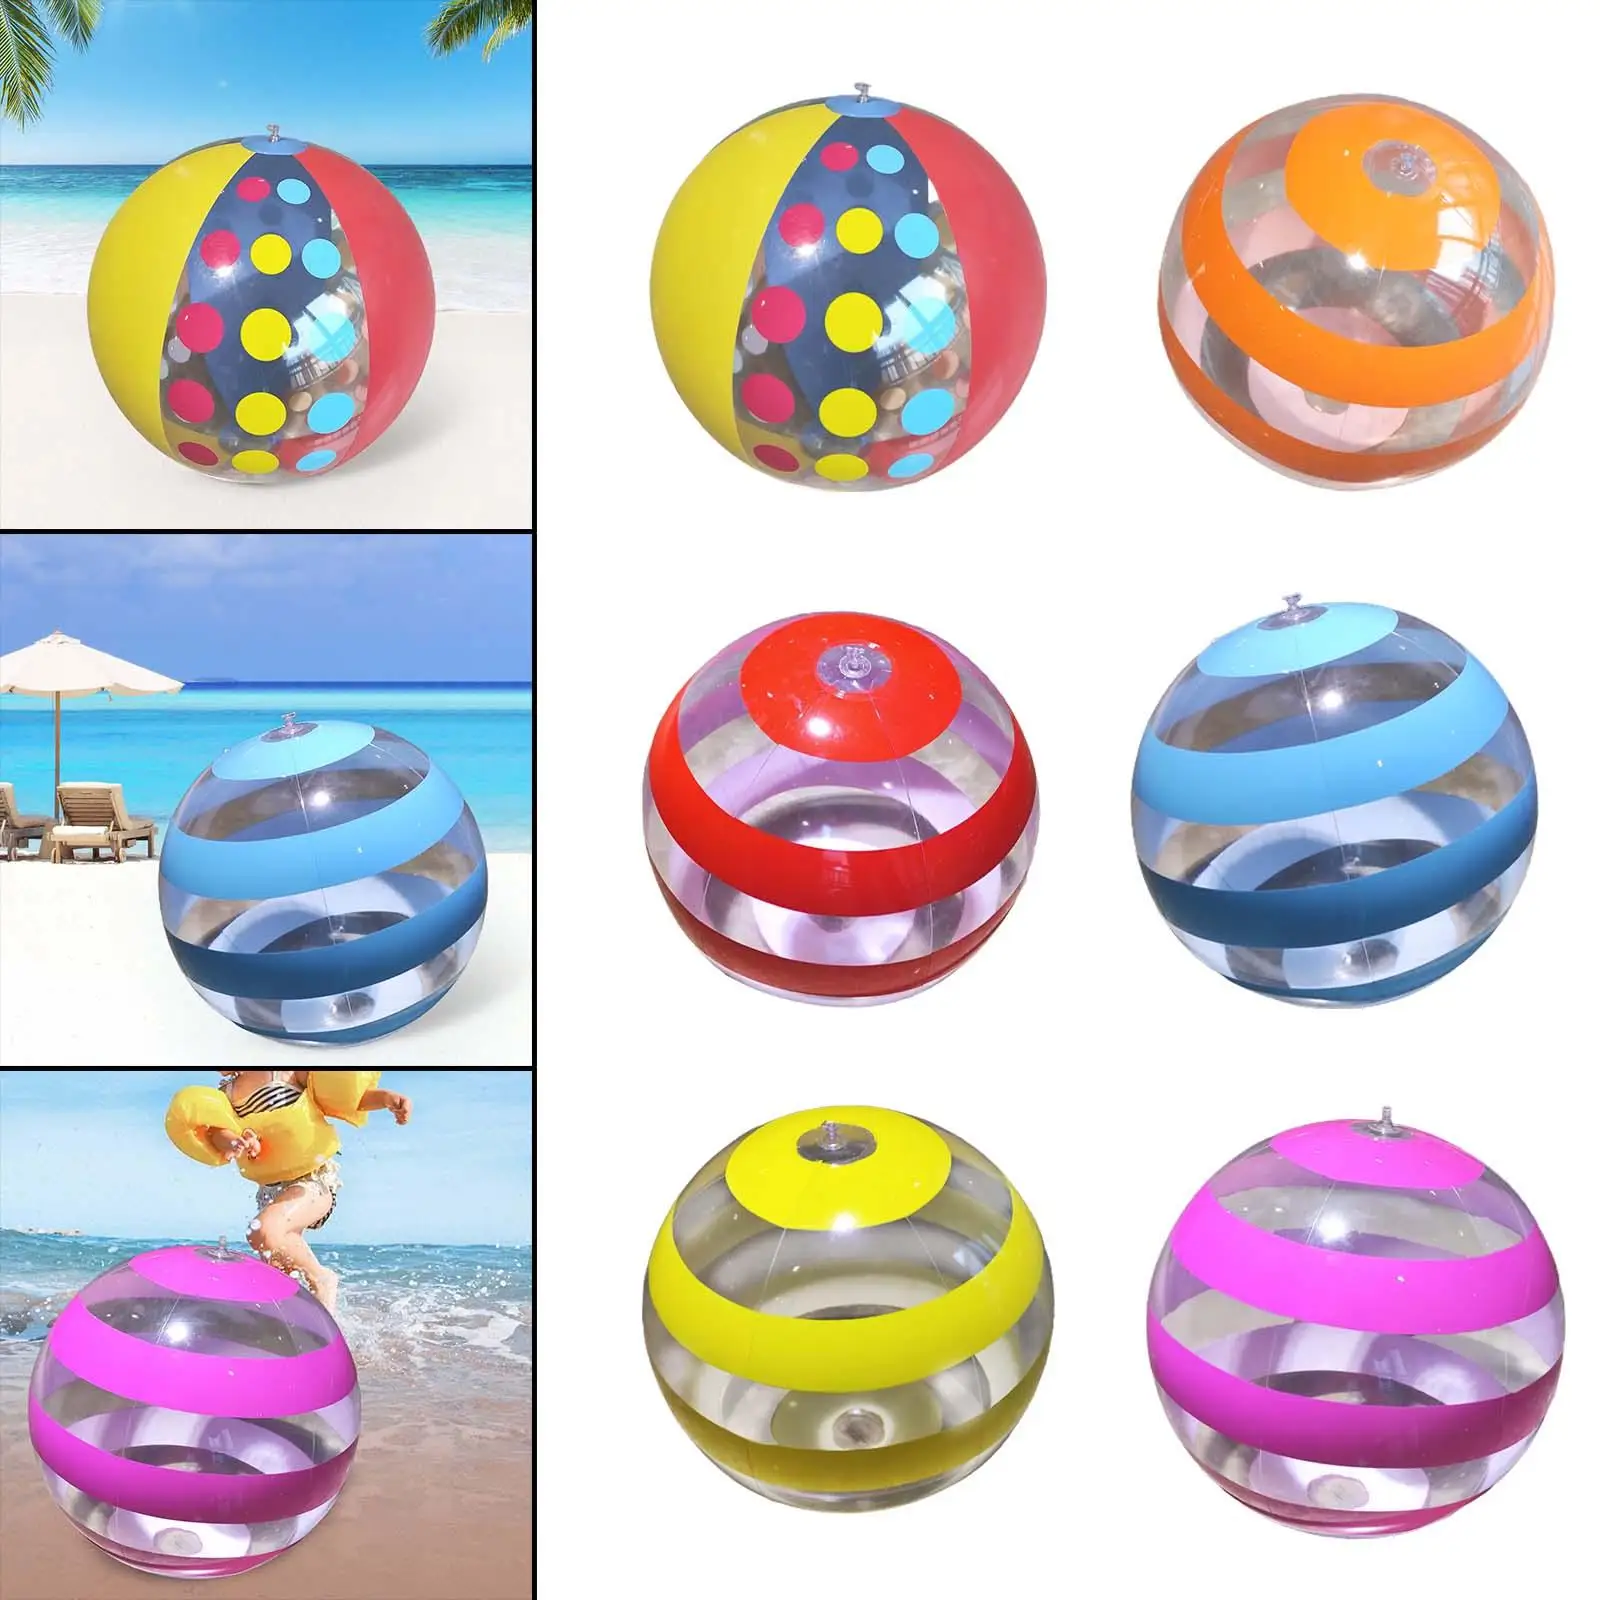 Beach Ball Leakproof Pool Game Inflatable Pool Toys for Home Beach Summer